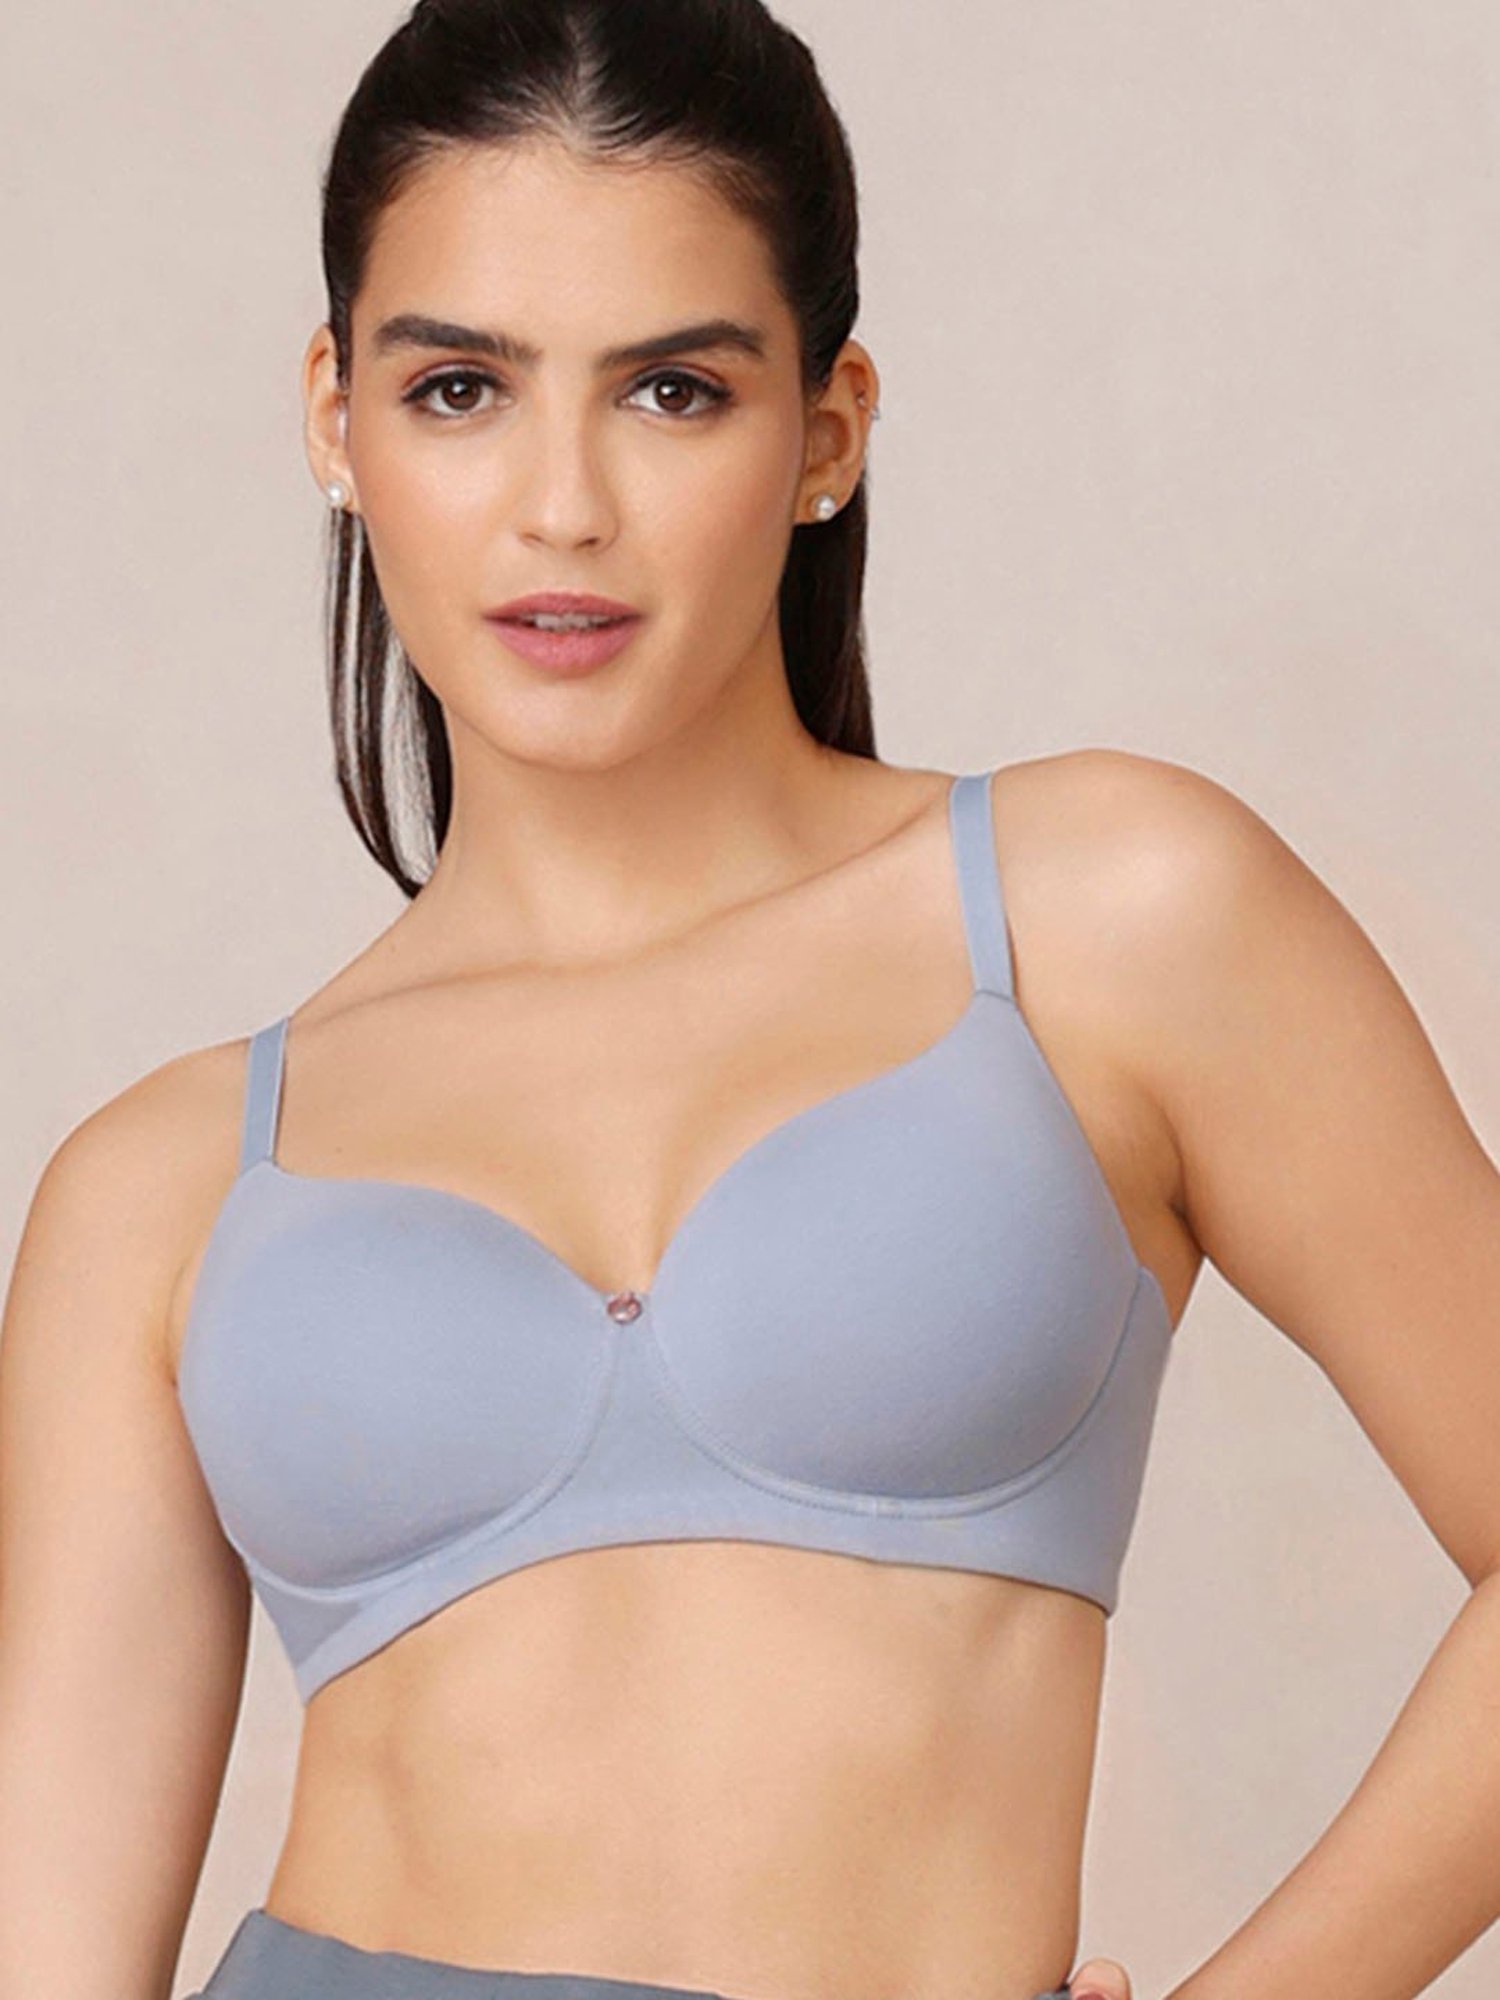 Nykd Cotton Soft Cup Hold Me Up T-Shirt Bra - Wireless, Full Coverage -  Black